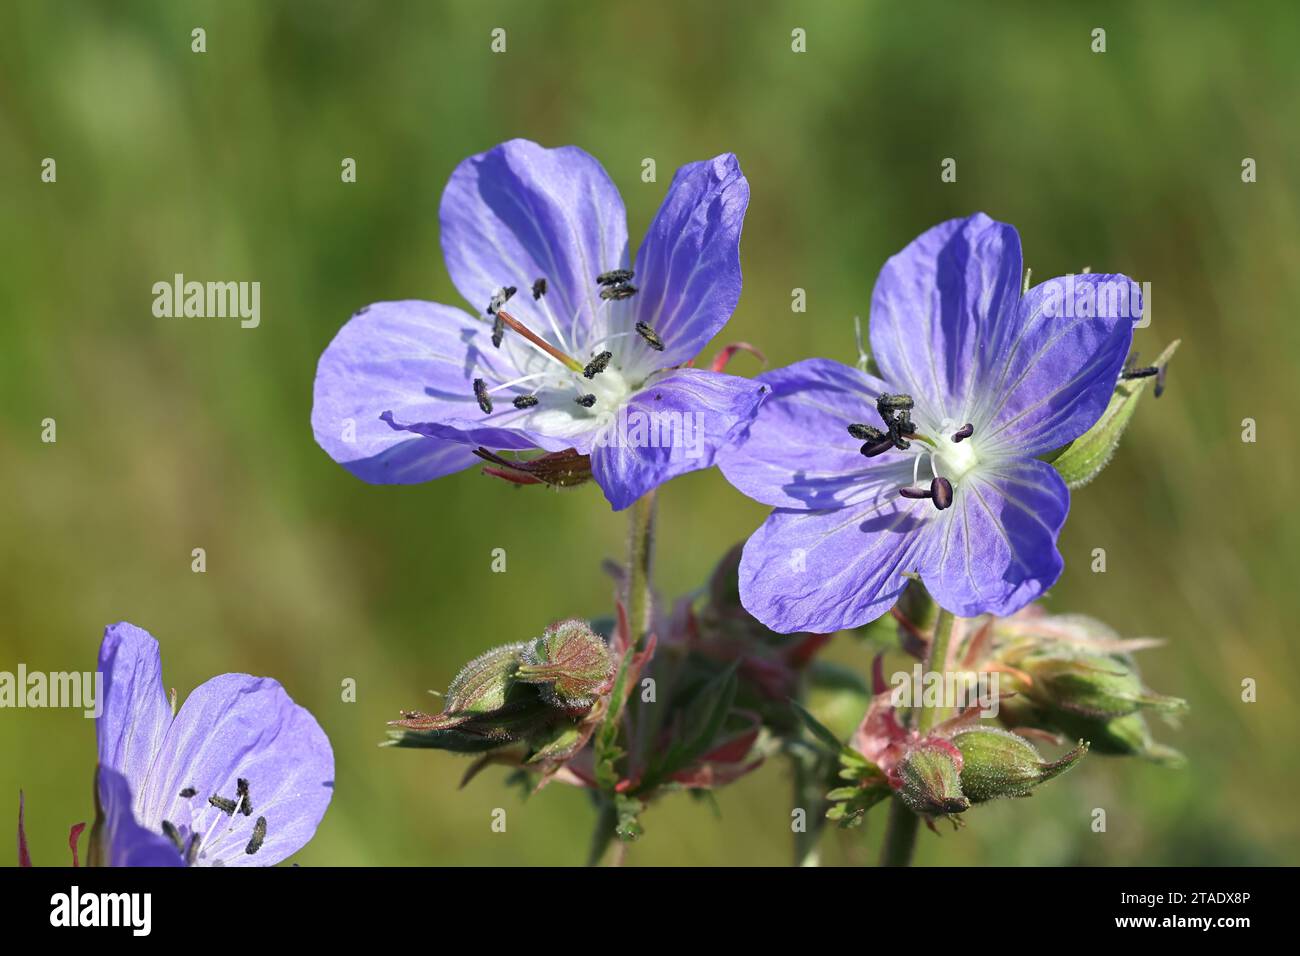 Meadow Cranesbill Geranium pratense, also known as Meadow crane’s-bill or Meadow geranium, wild flowering plant from Finland Stock Photo